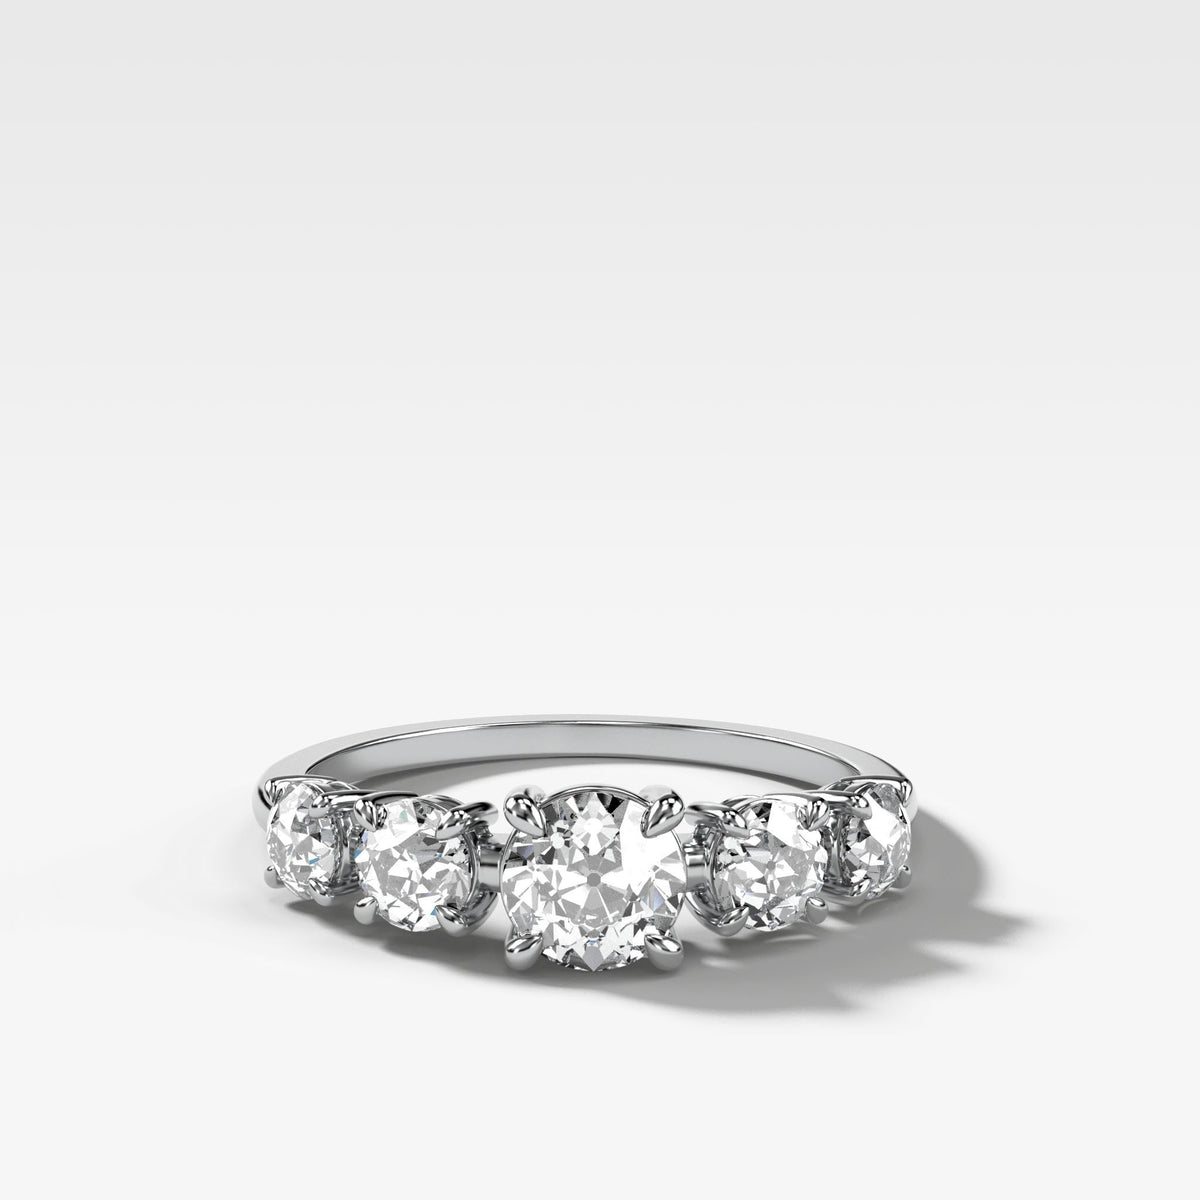 Graduated Five Stone ring with Old Euro Cut Diamonds by Good Stone in White Gold